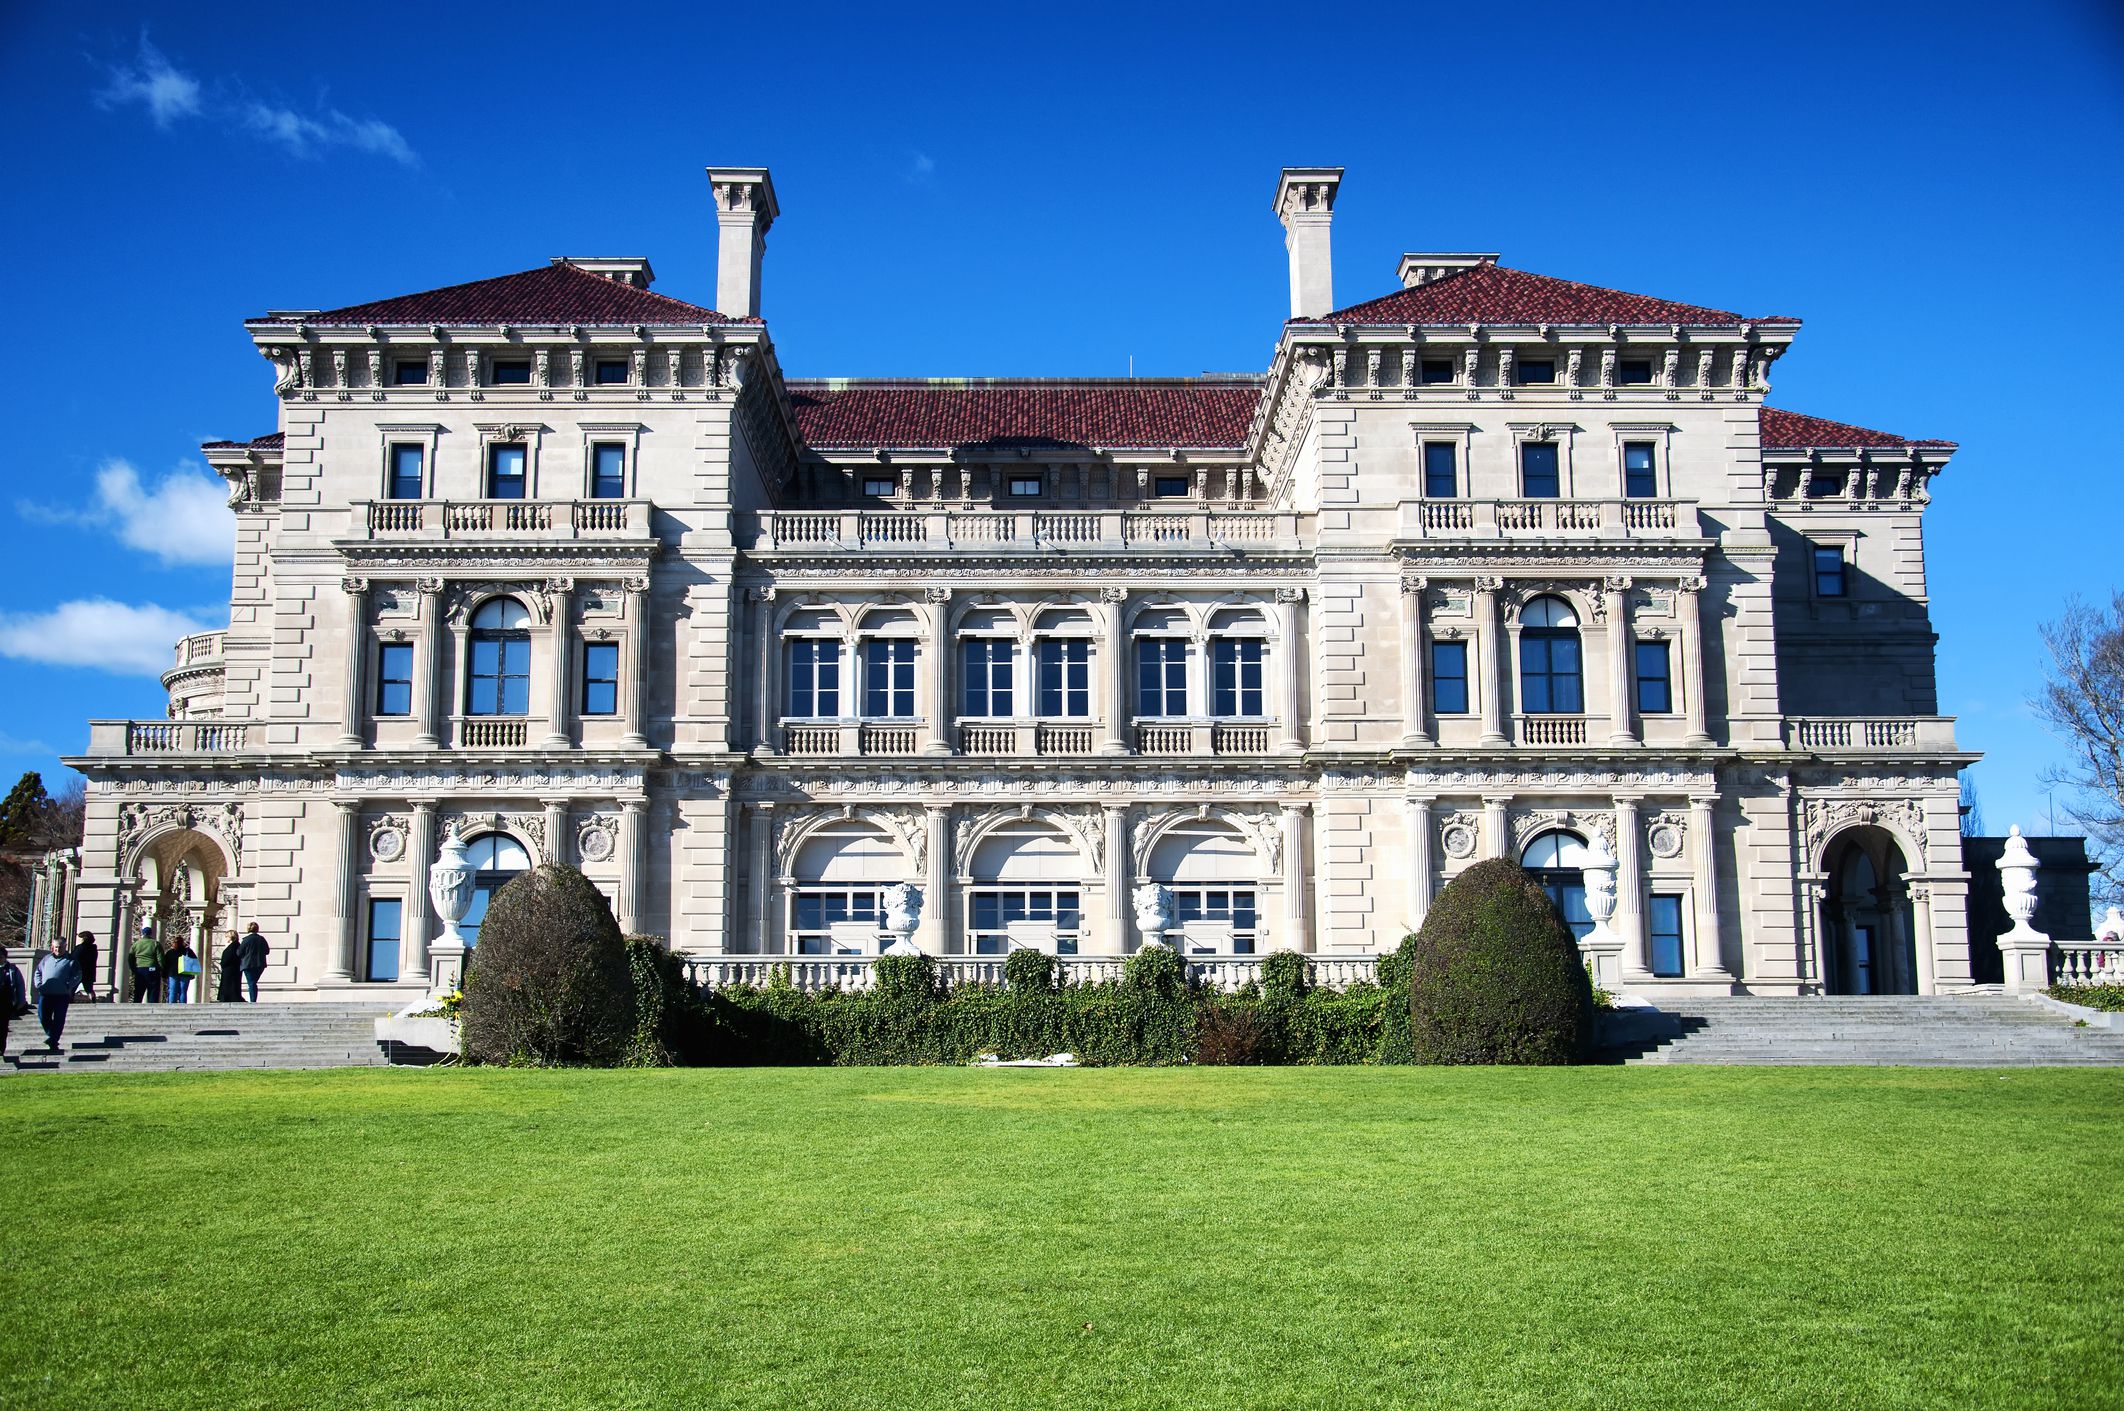 <p>This “<a href="https://www.newportmansions.org/explore/the-breakers">summer cottage</a>” belonging to and inhabited by the wealthy Vanderbilt family was completed in 1895. It became a National Historic Landmark in 1994.</p>